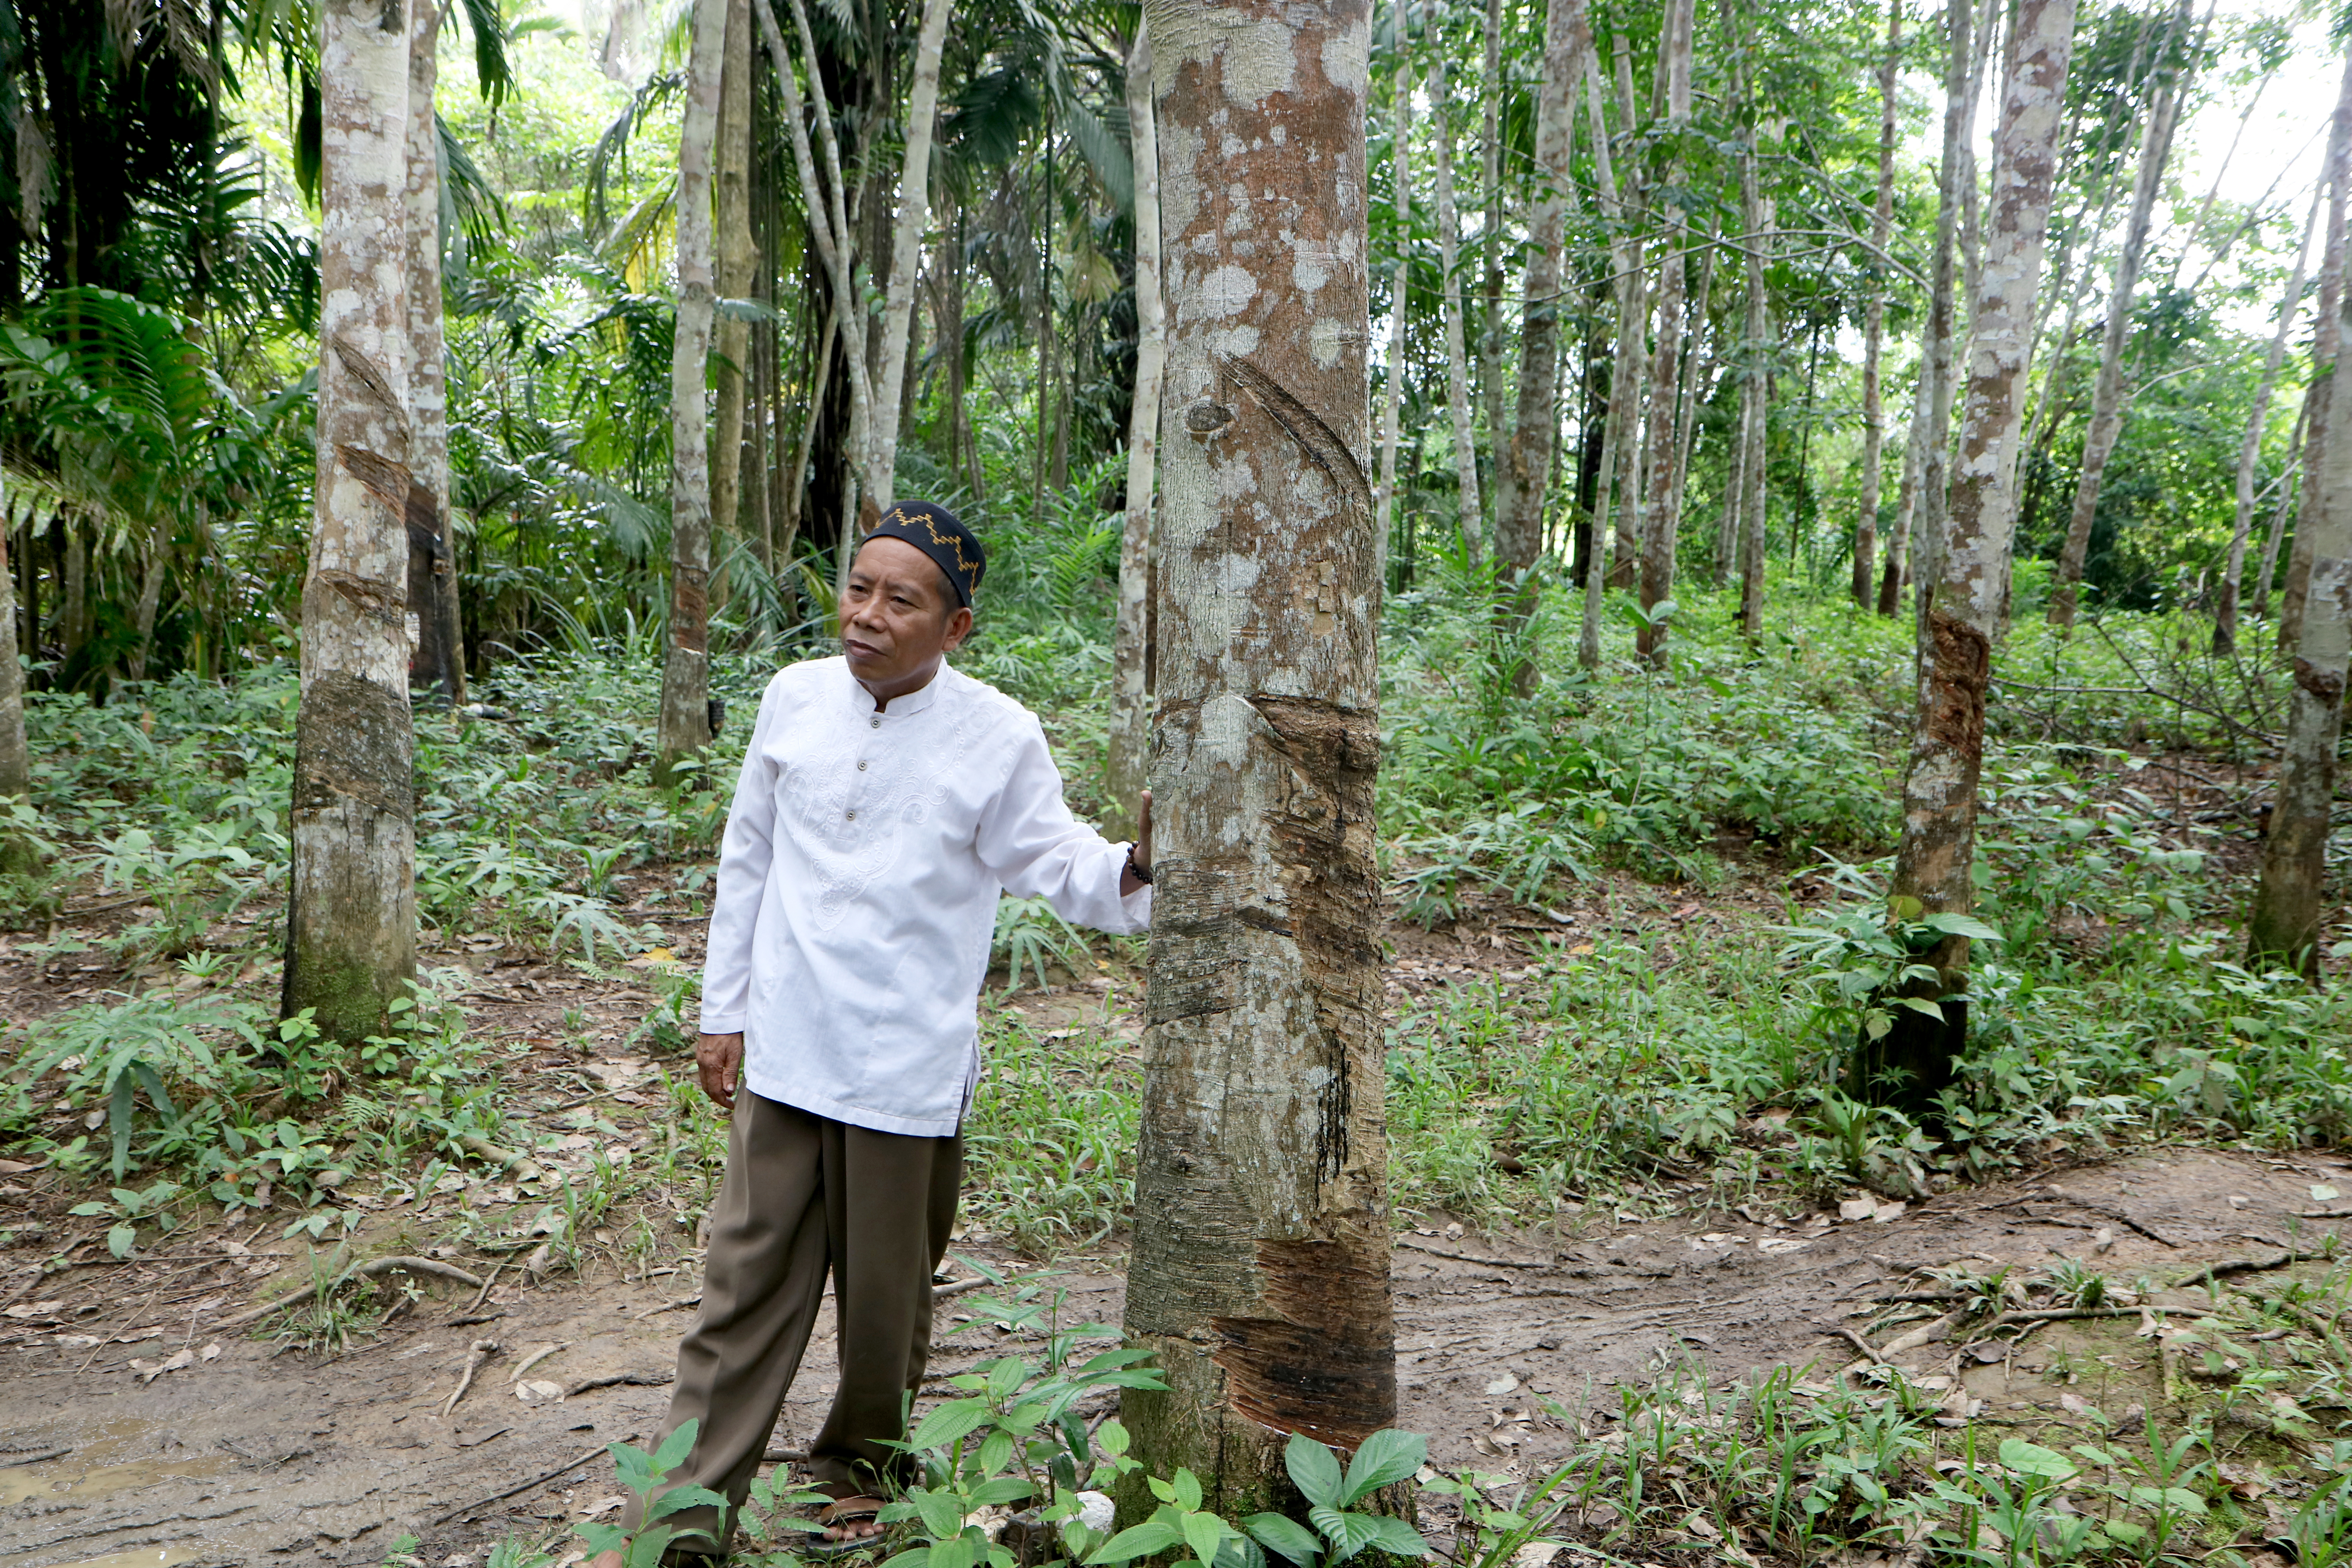 Still from film Tidak ada Kapital showing local chief in a forest, in conversation about local land practices